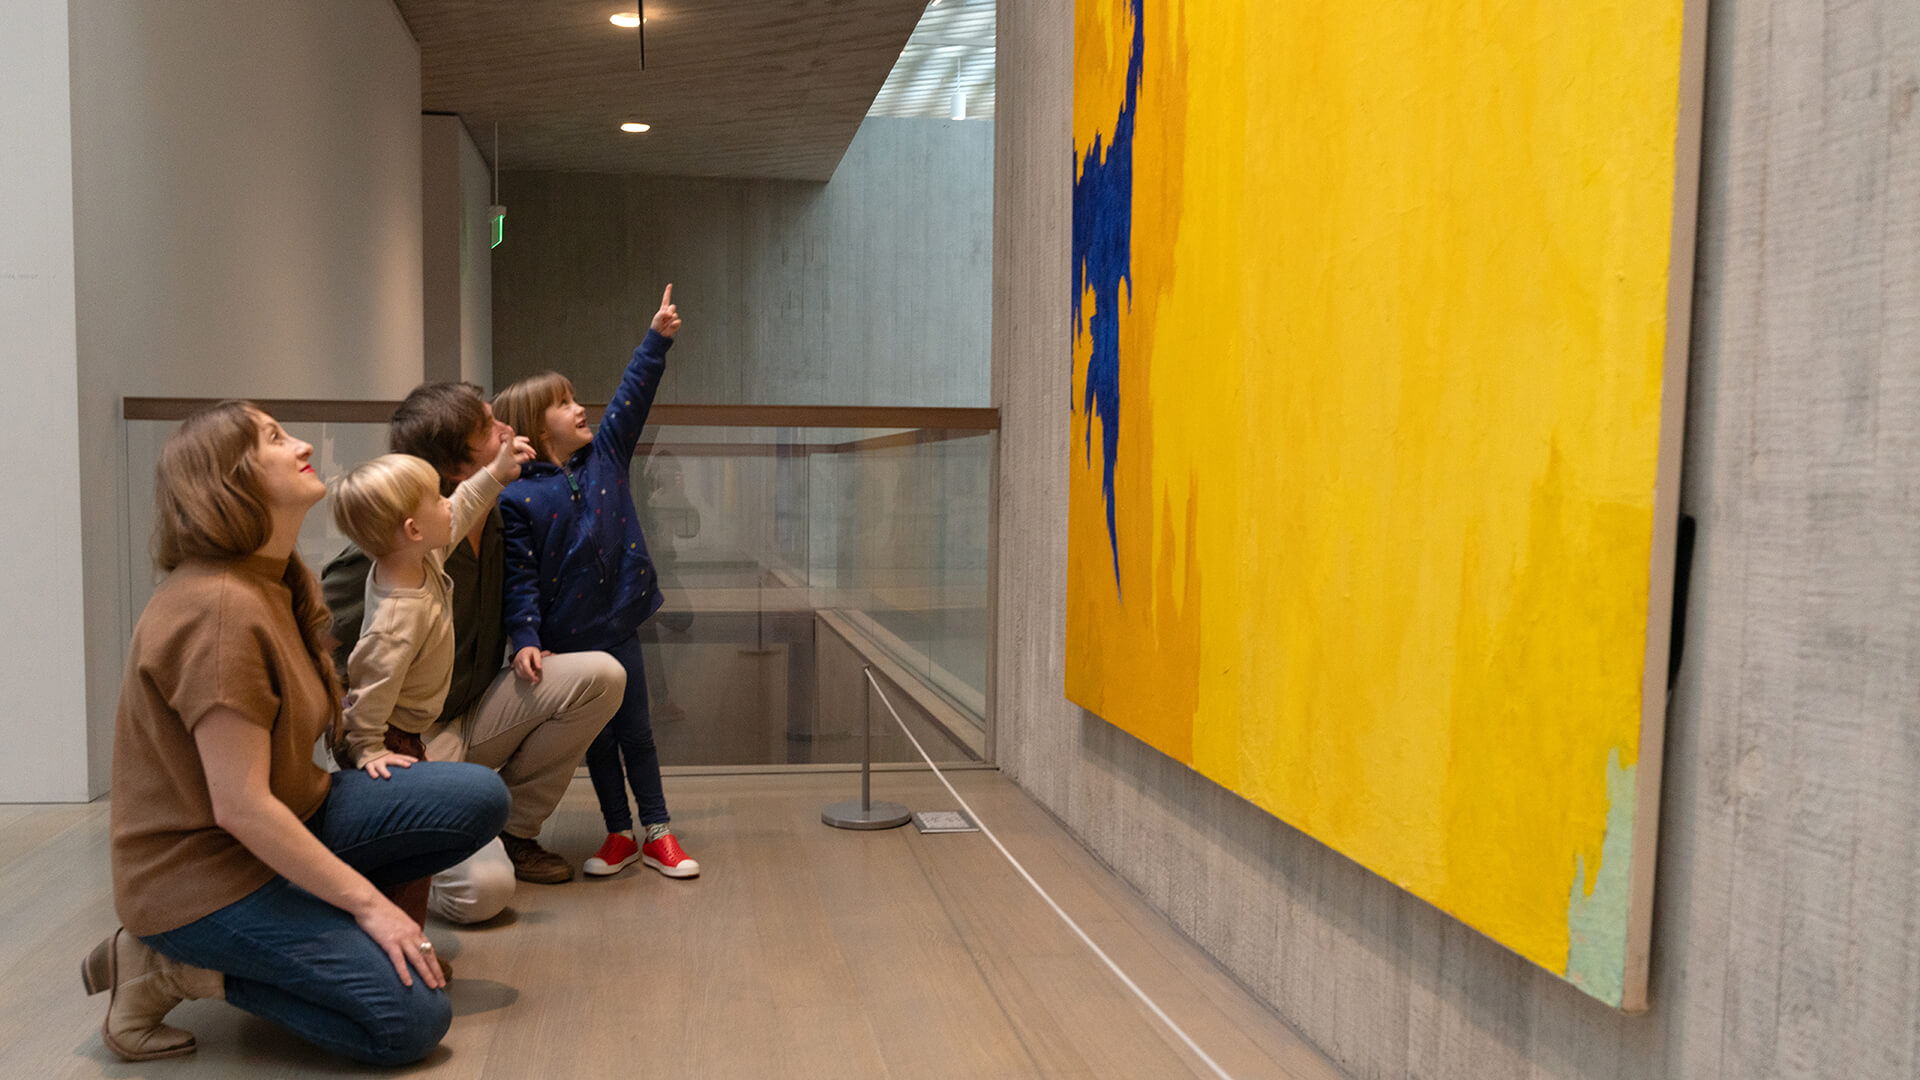 A family kneels on the ground and looks up at a large yellow abstract painting